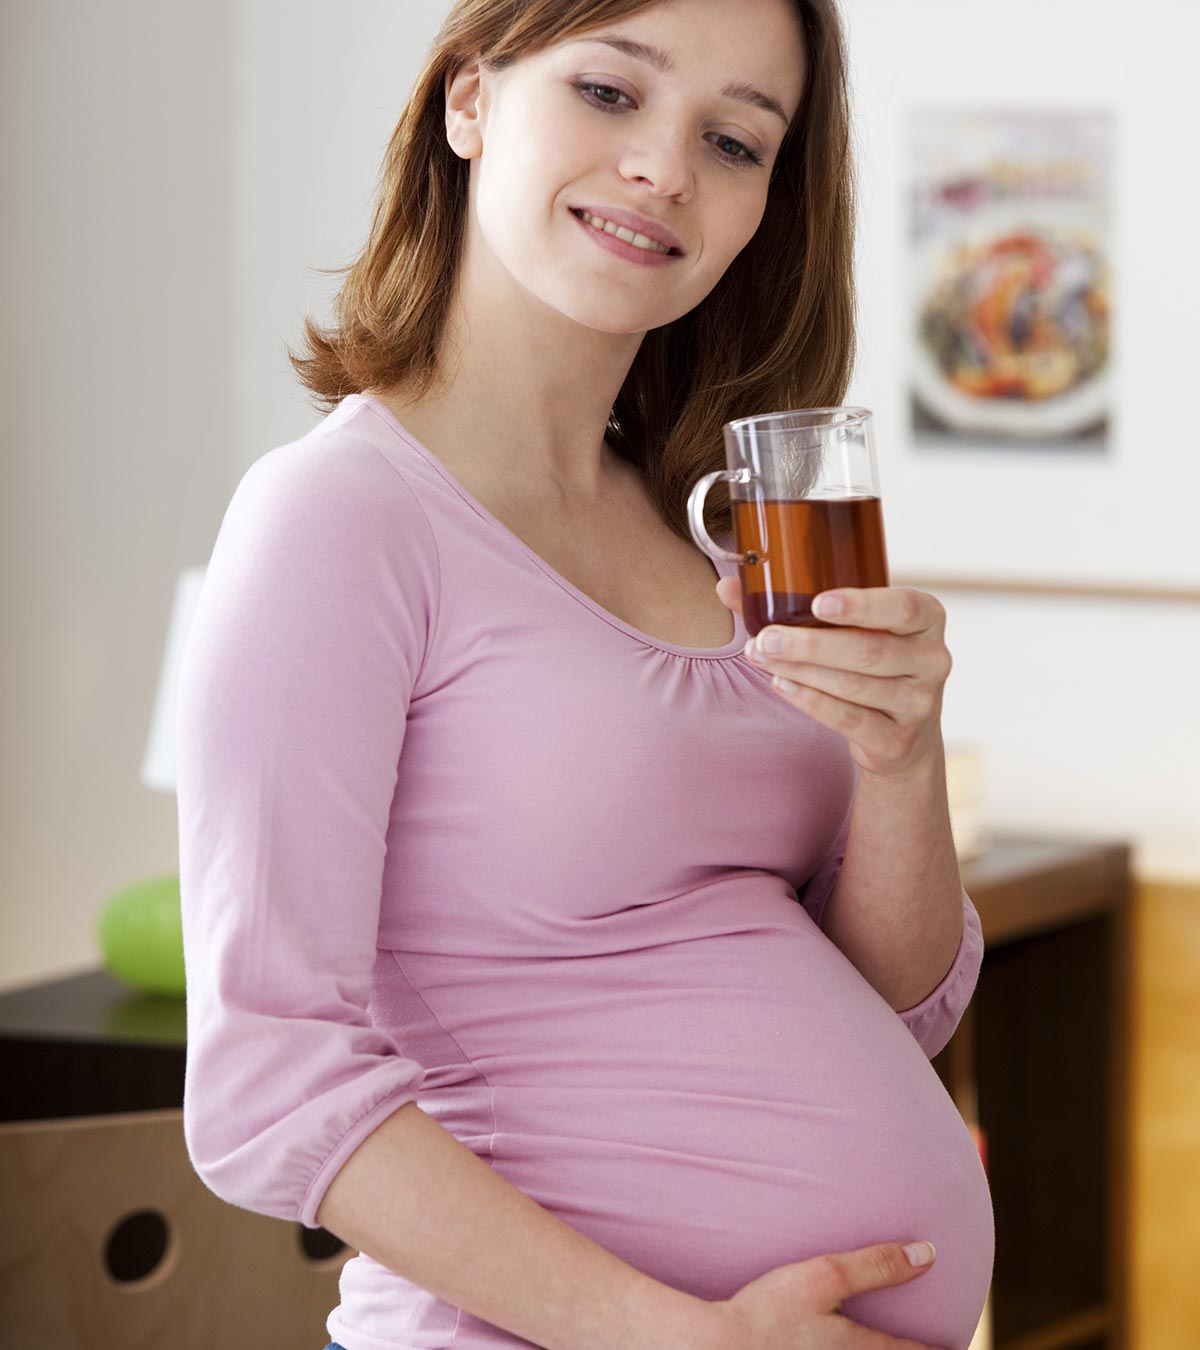 Is It Safe To Drink Iced Tea During Pregnancy?